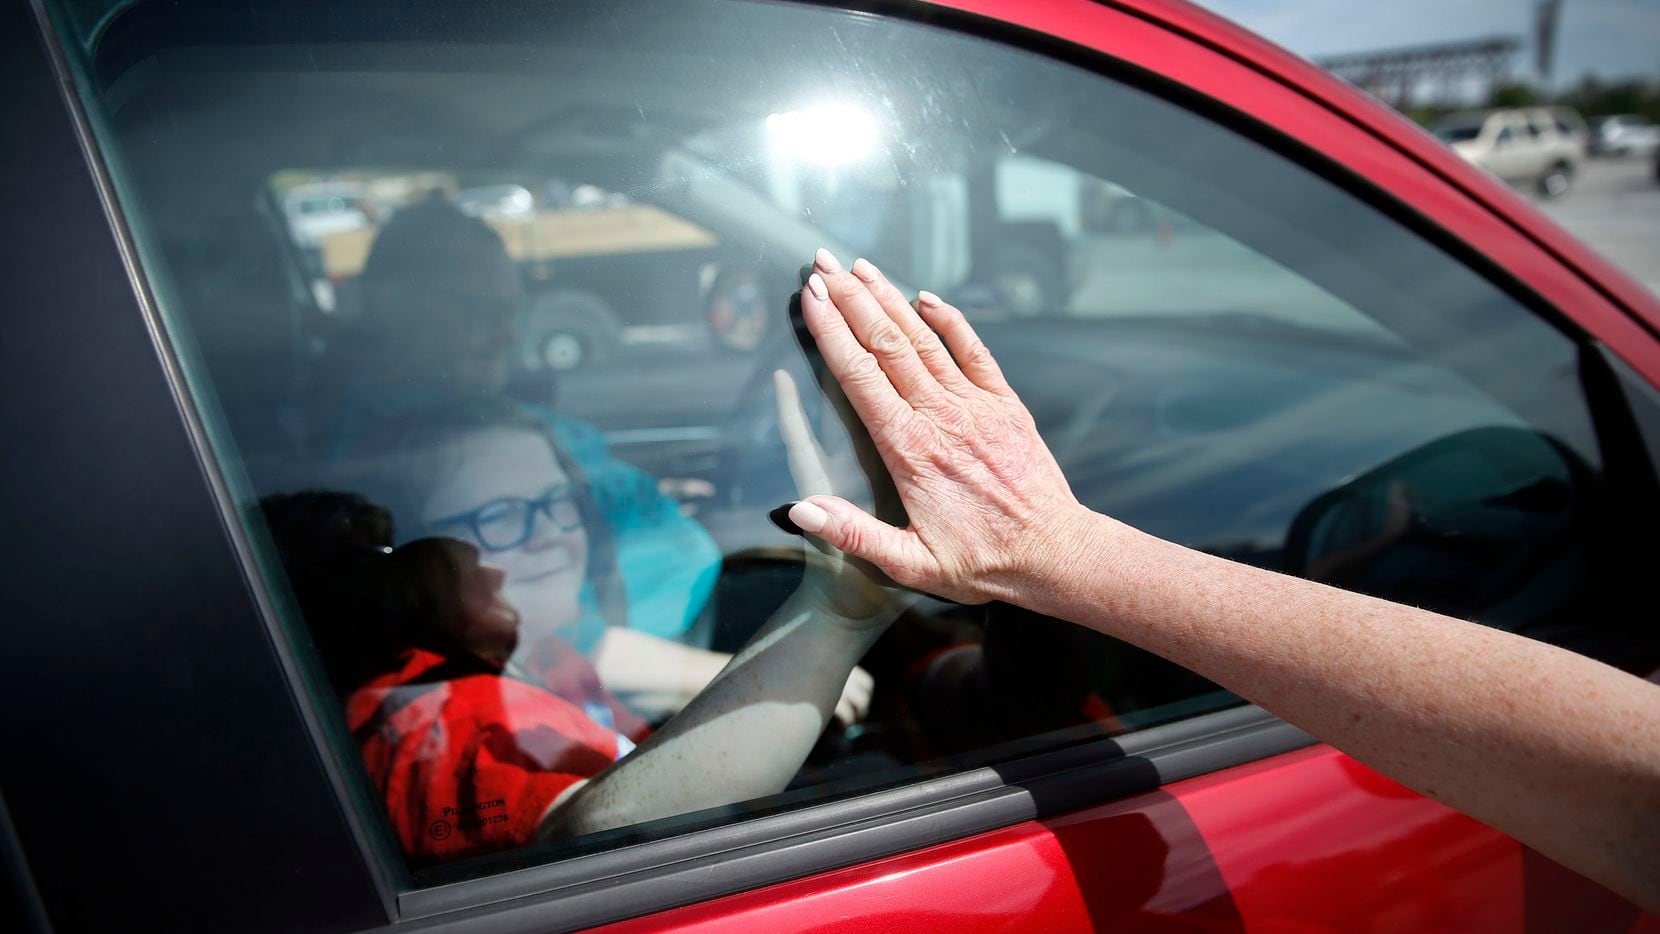 Volunteer Karen Kirk, of Houston, gives a student a high-five through the window after a drive-thru meal pickup outside AT&T Stadium in Arlington, Texas, Saturday, March 28, 2020. The Arlington ISD will distribute school supply packets to Pre-K students on Tuesday at a similar drive-through event.